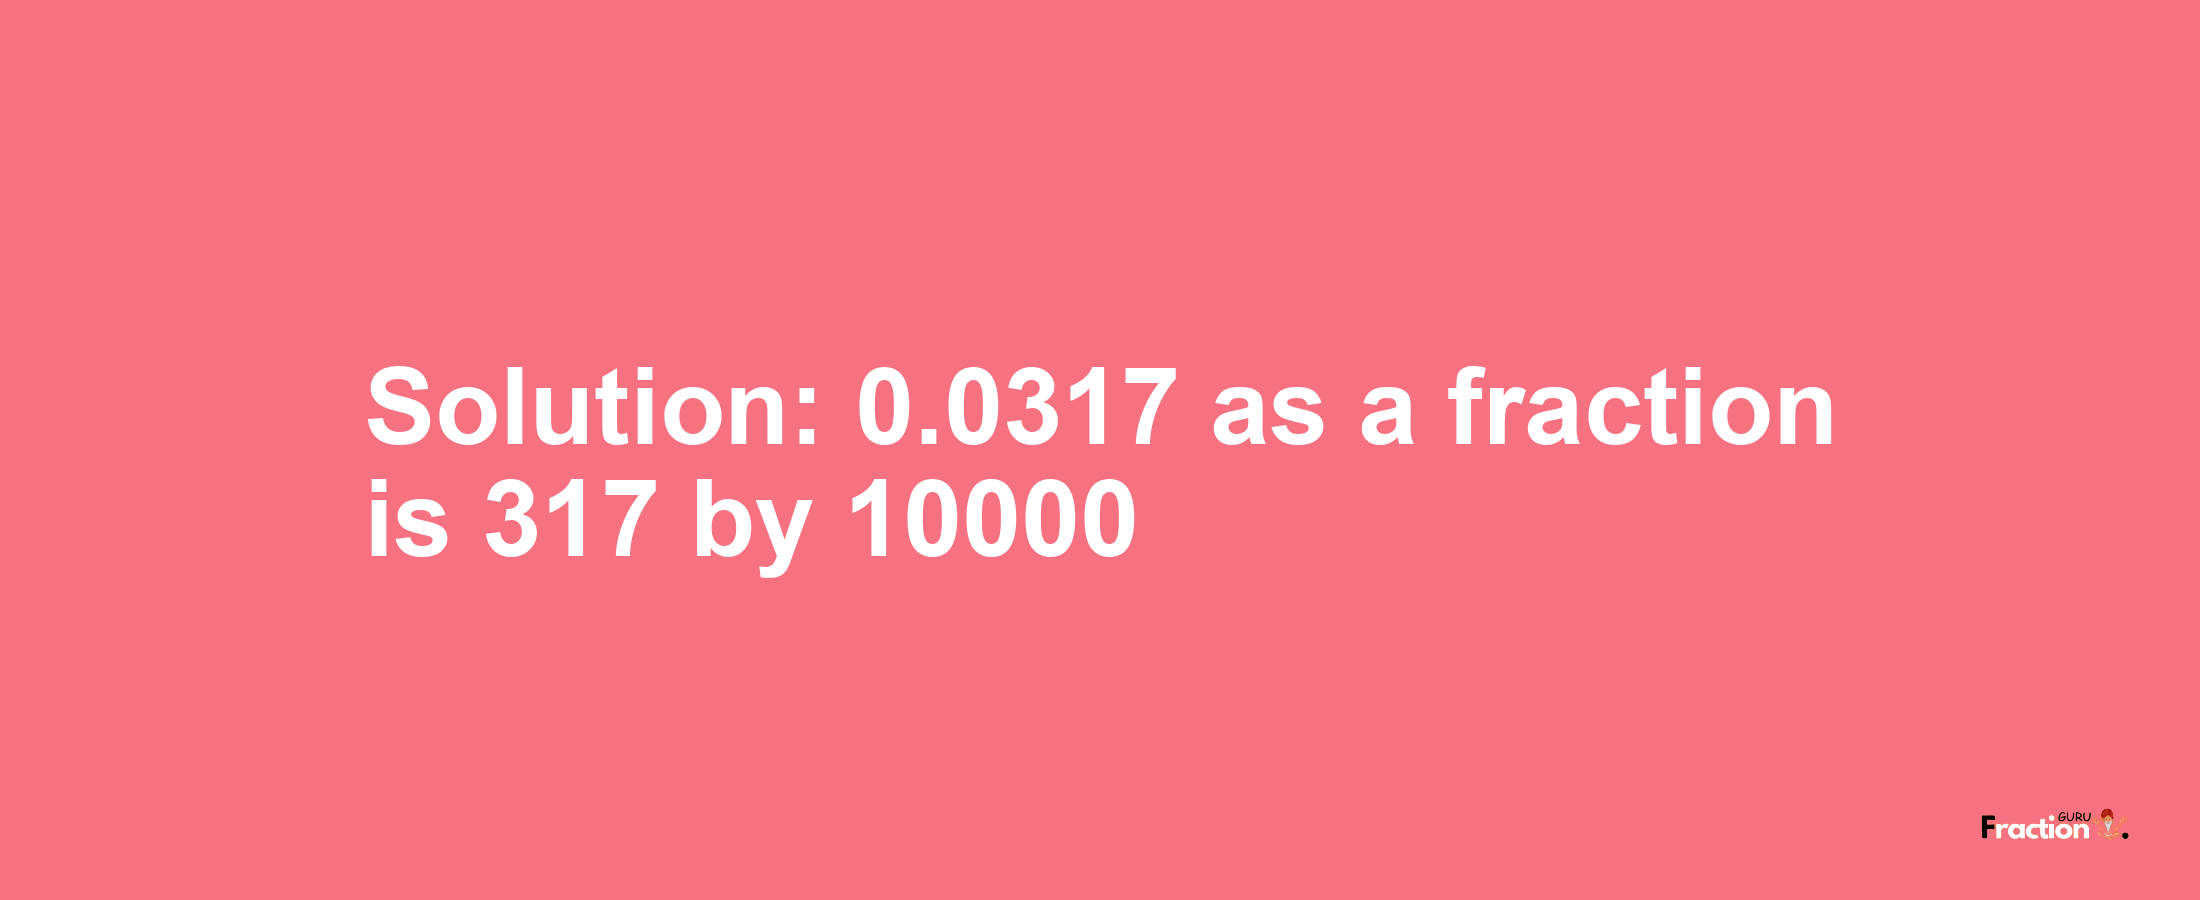 Solution:0.0317 as a fraction is 317/10000